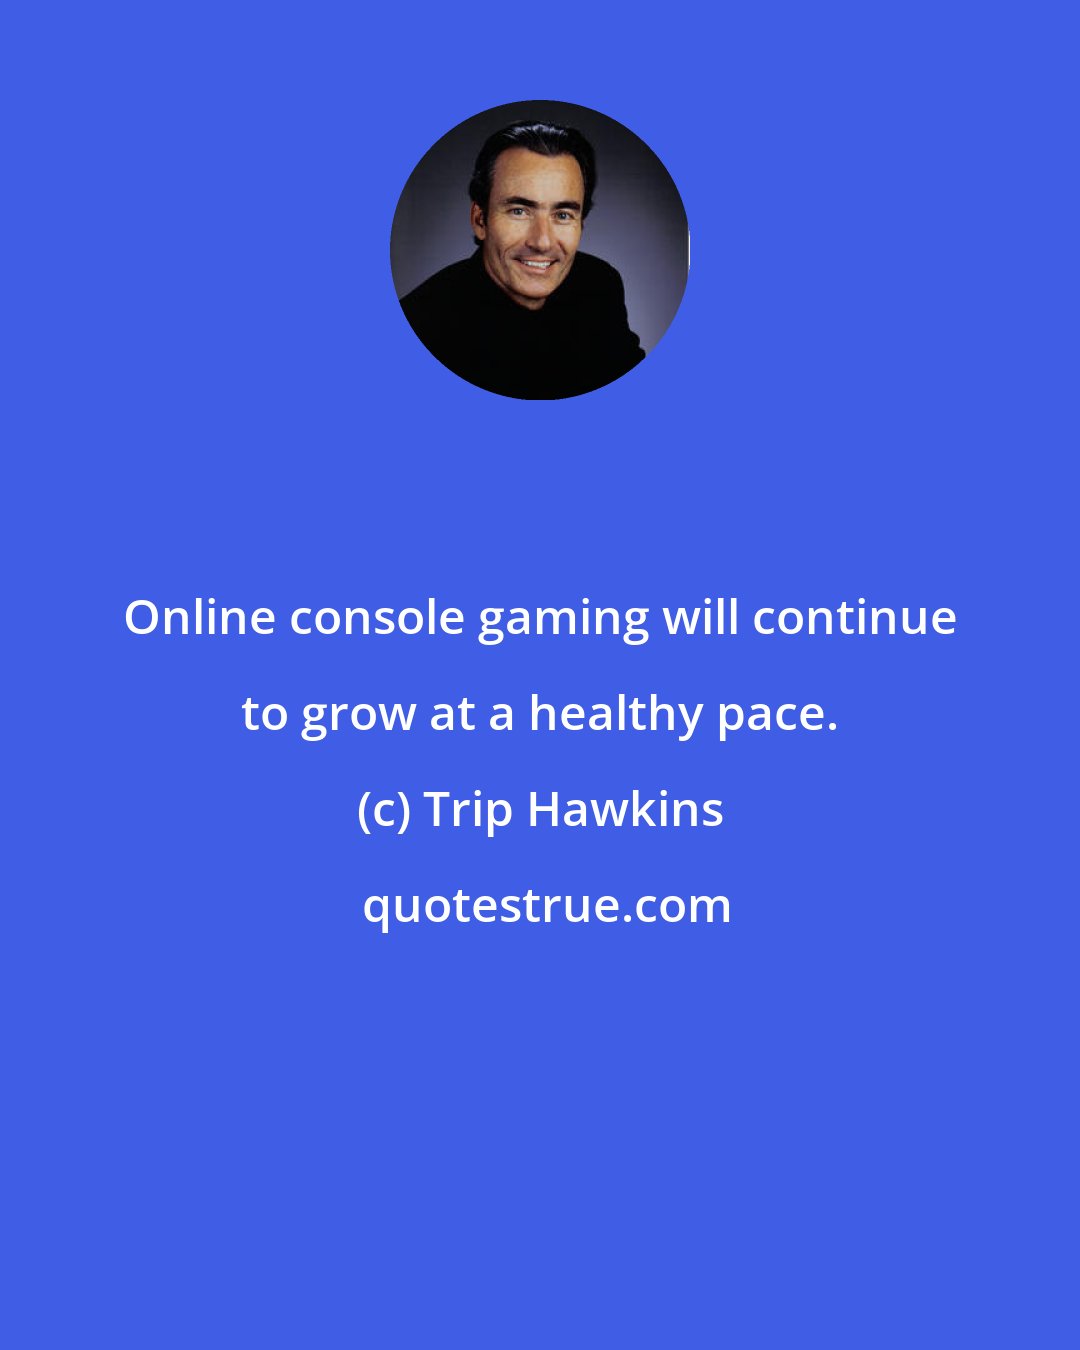 Trip Hawkins: Online console gaming will continue to grow at a healthy pace.